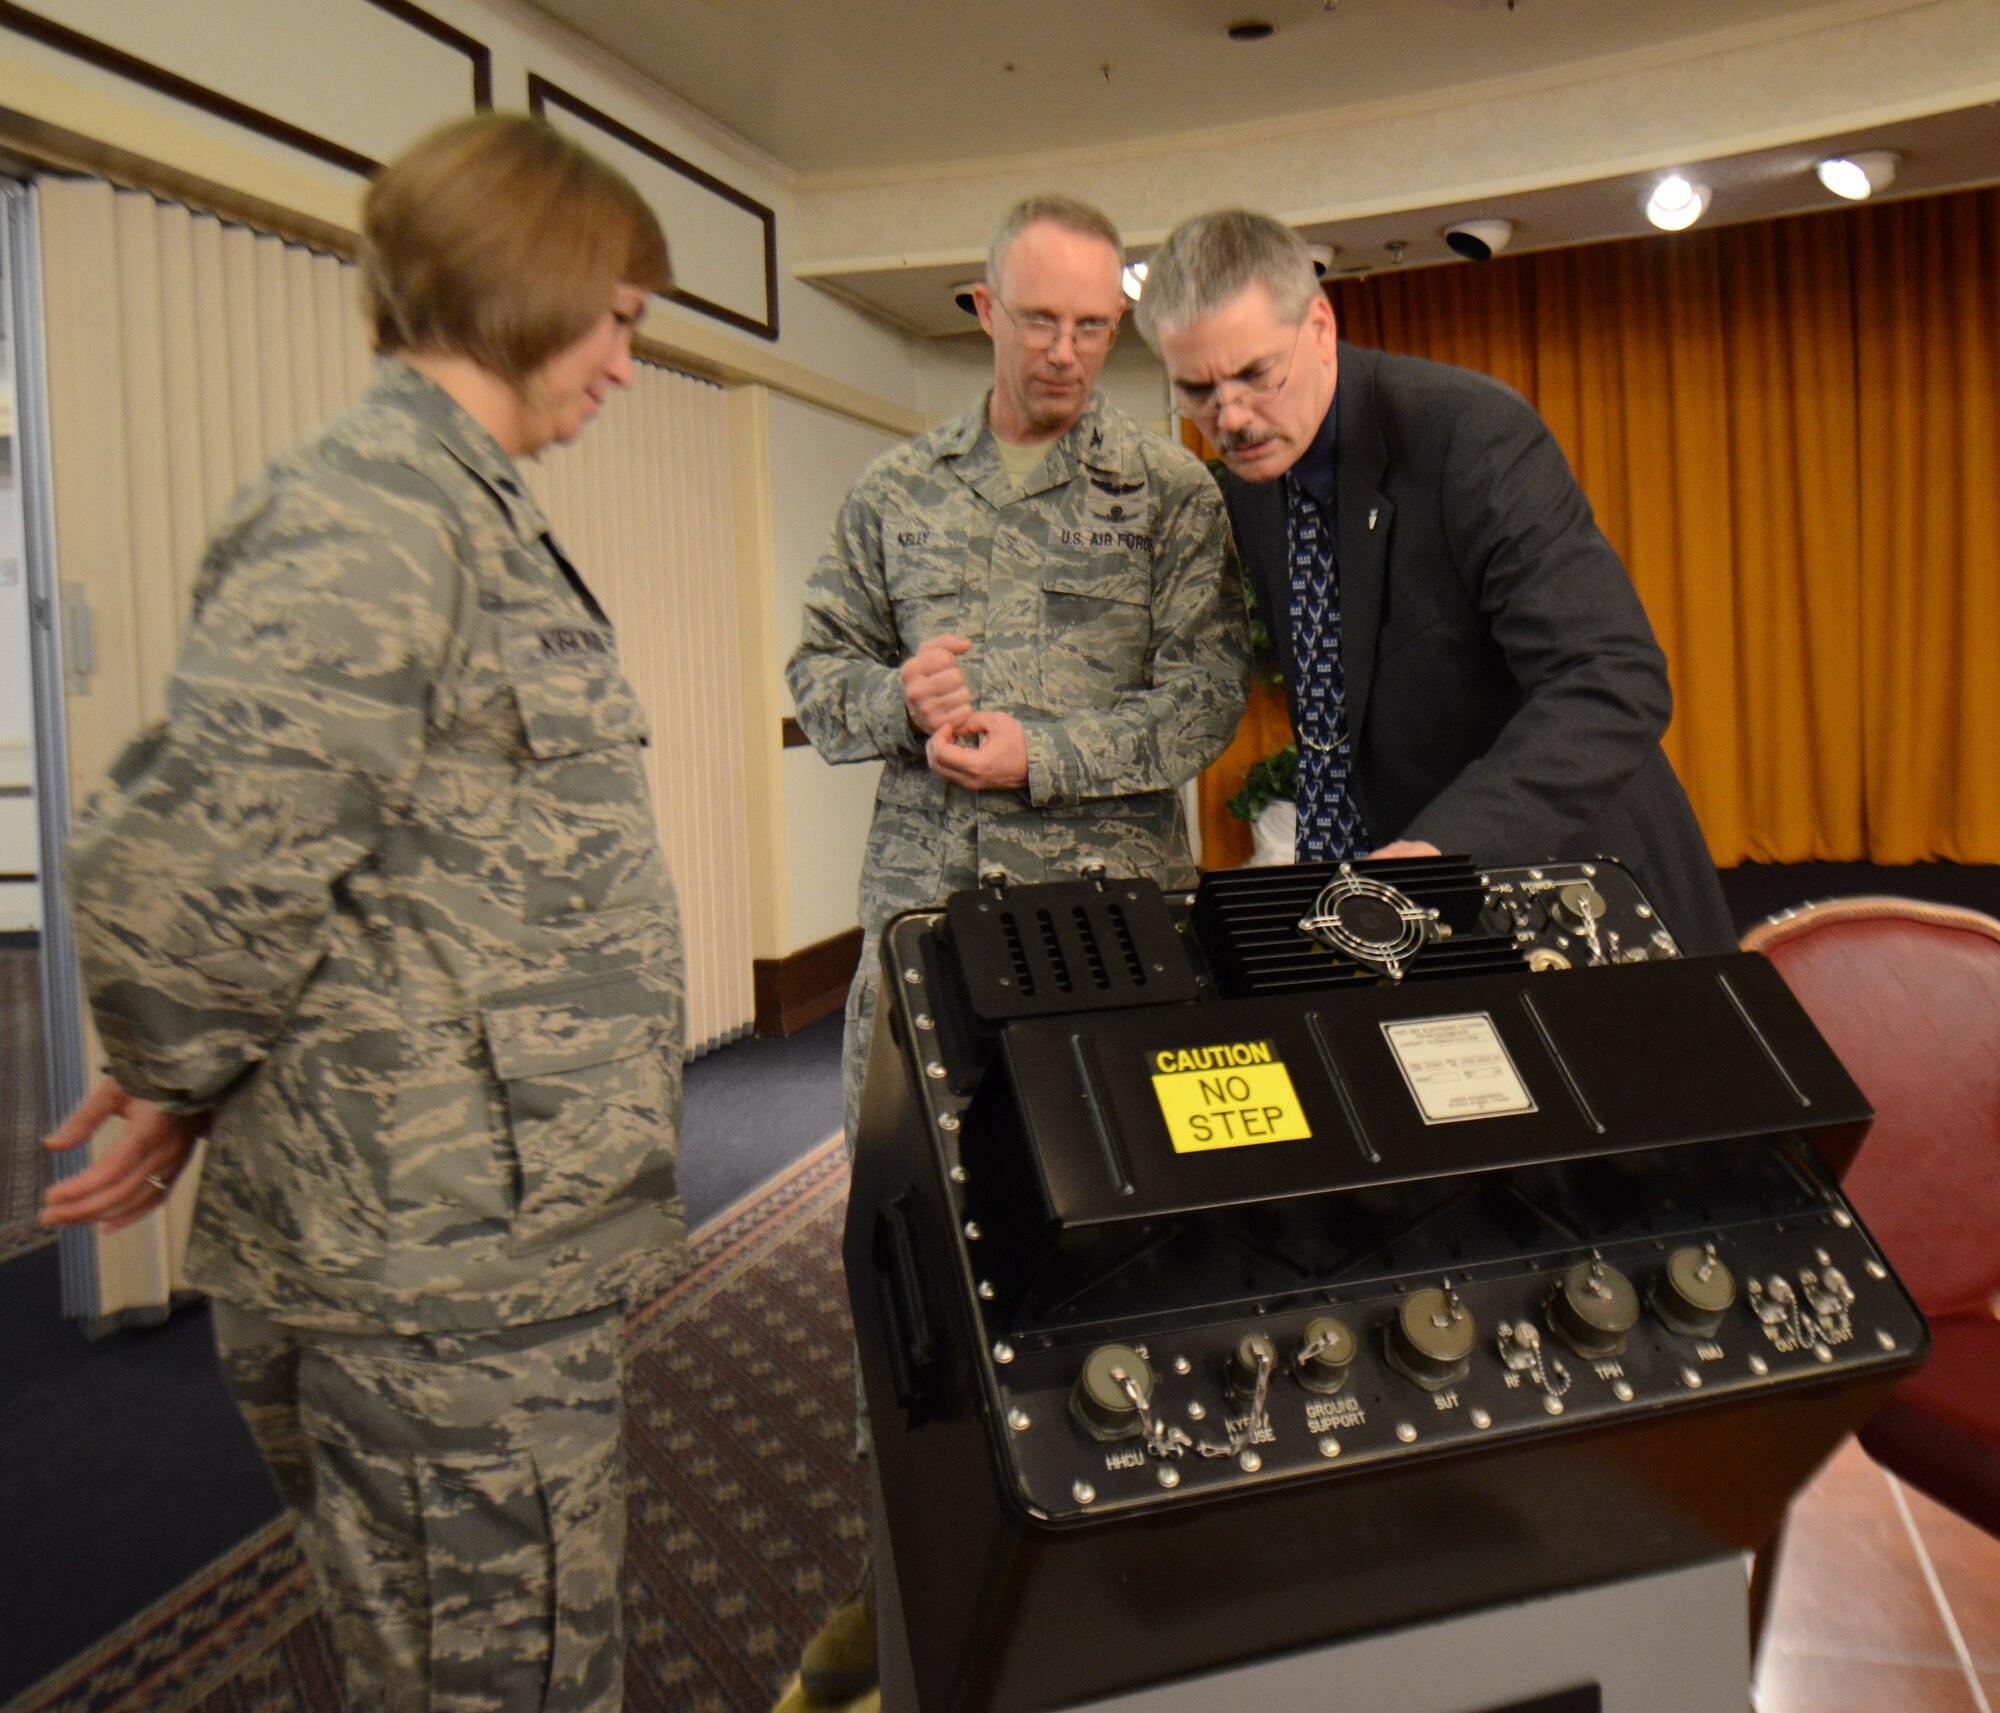 Col. Michael Kelly, Electronic Warfare and Avionics Division chief and John Miller, Agile Combat Support director, view a Joint Service Electronic Combat Systems Tester Tuesday during a reception at the Horizons Event Center. (U.S. Air Force photo by Tommie Horton)
